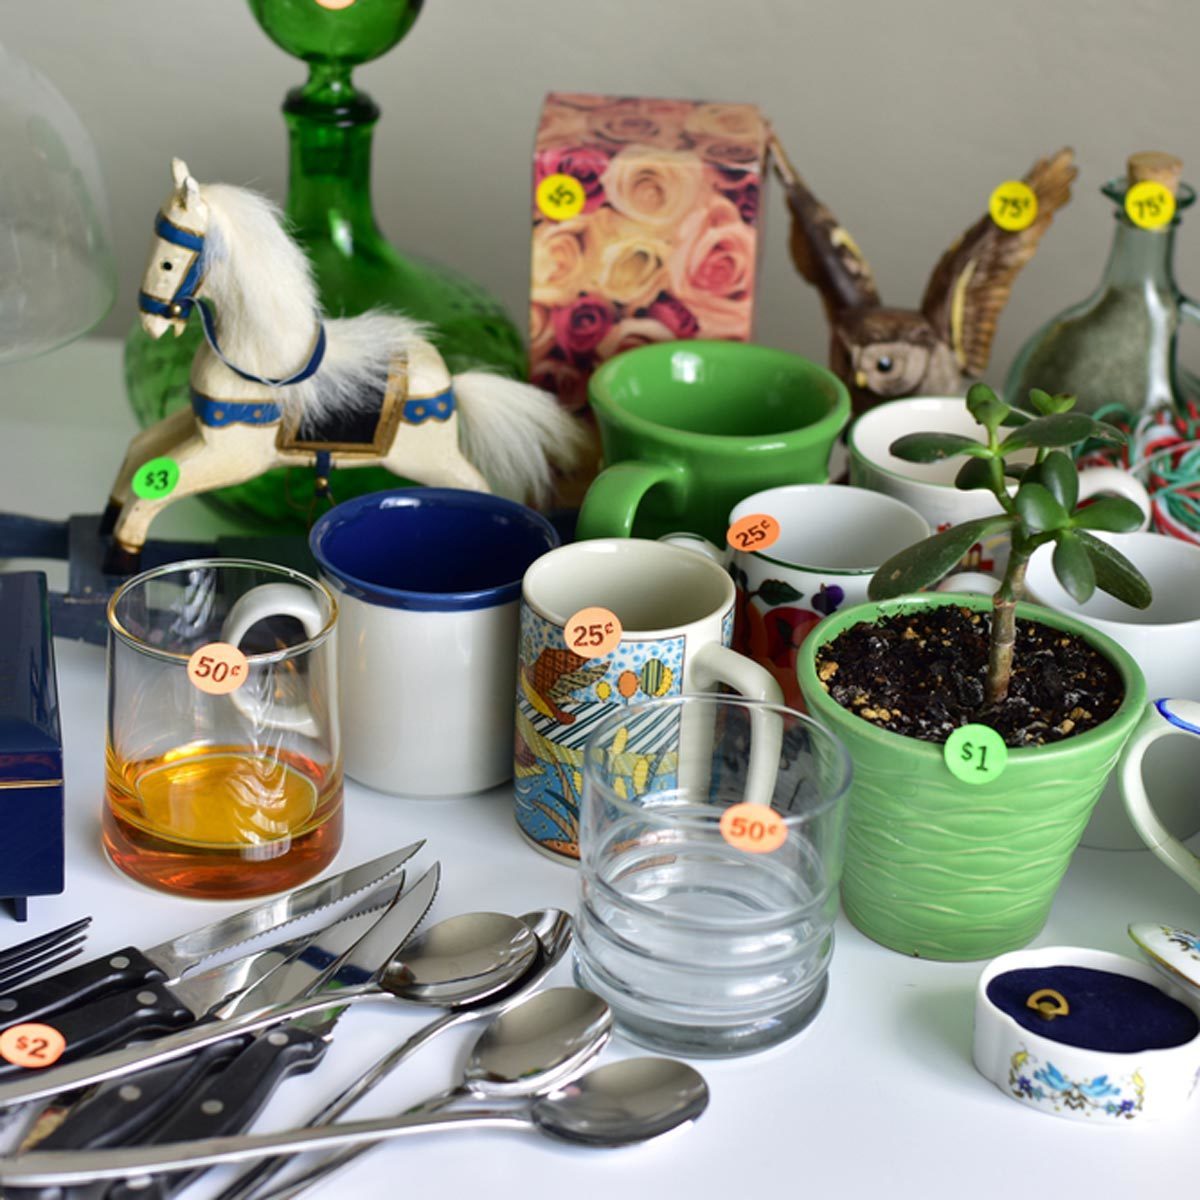 13 Easy Ways to Prepare for a Garage Sale